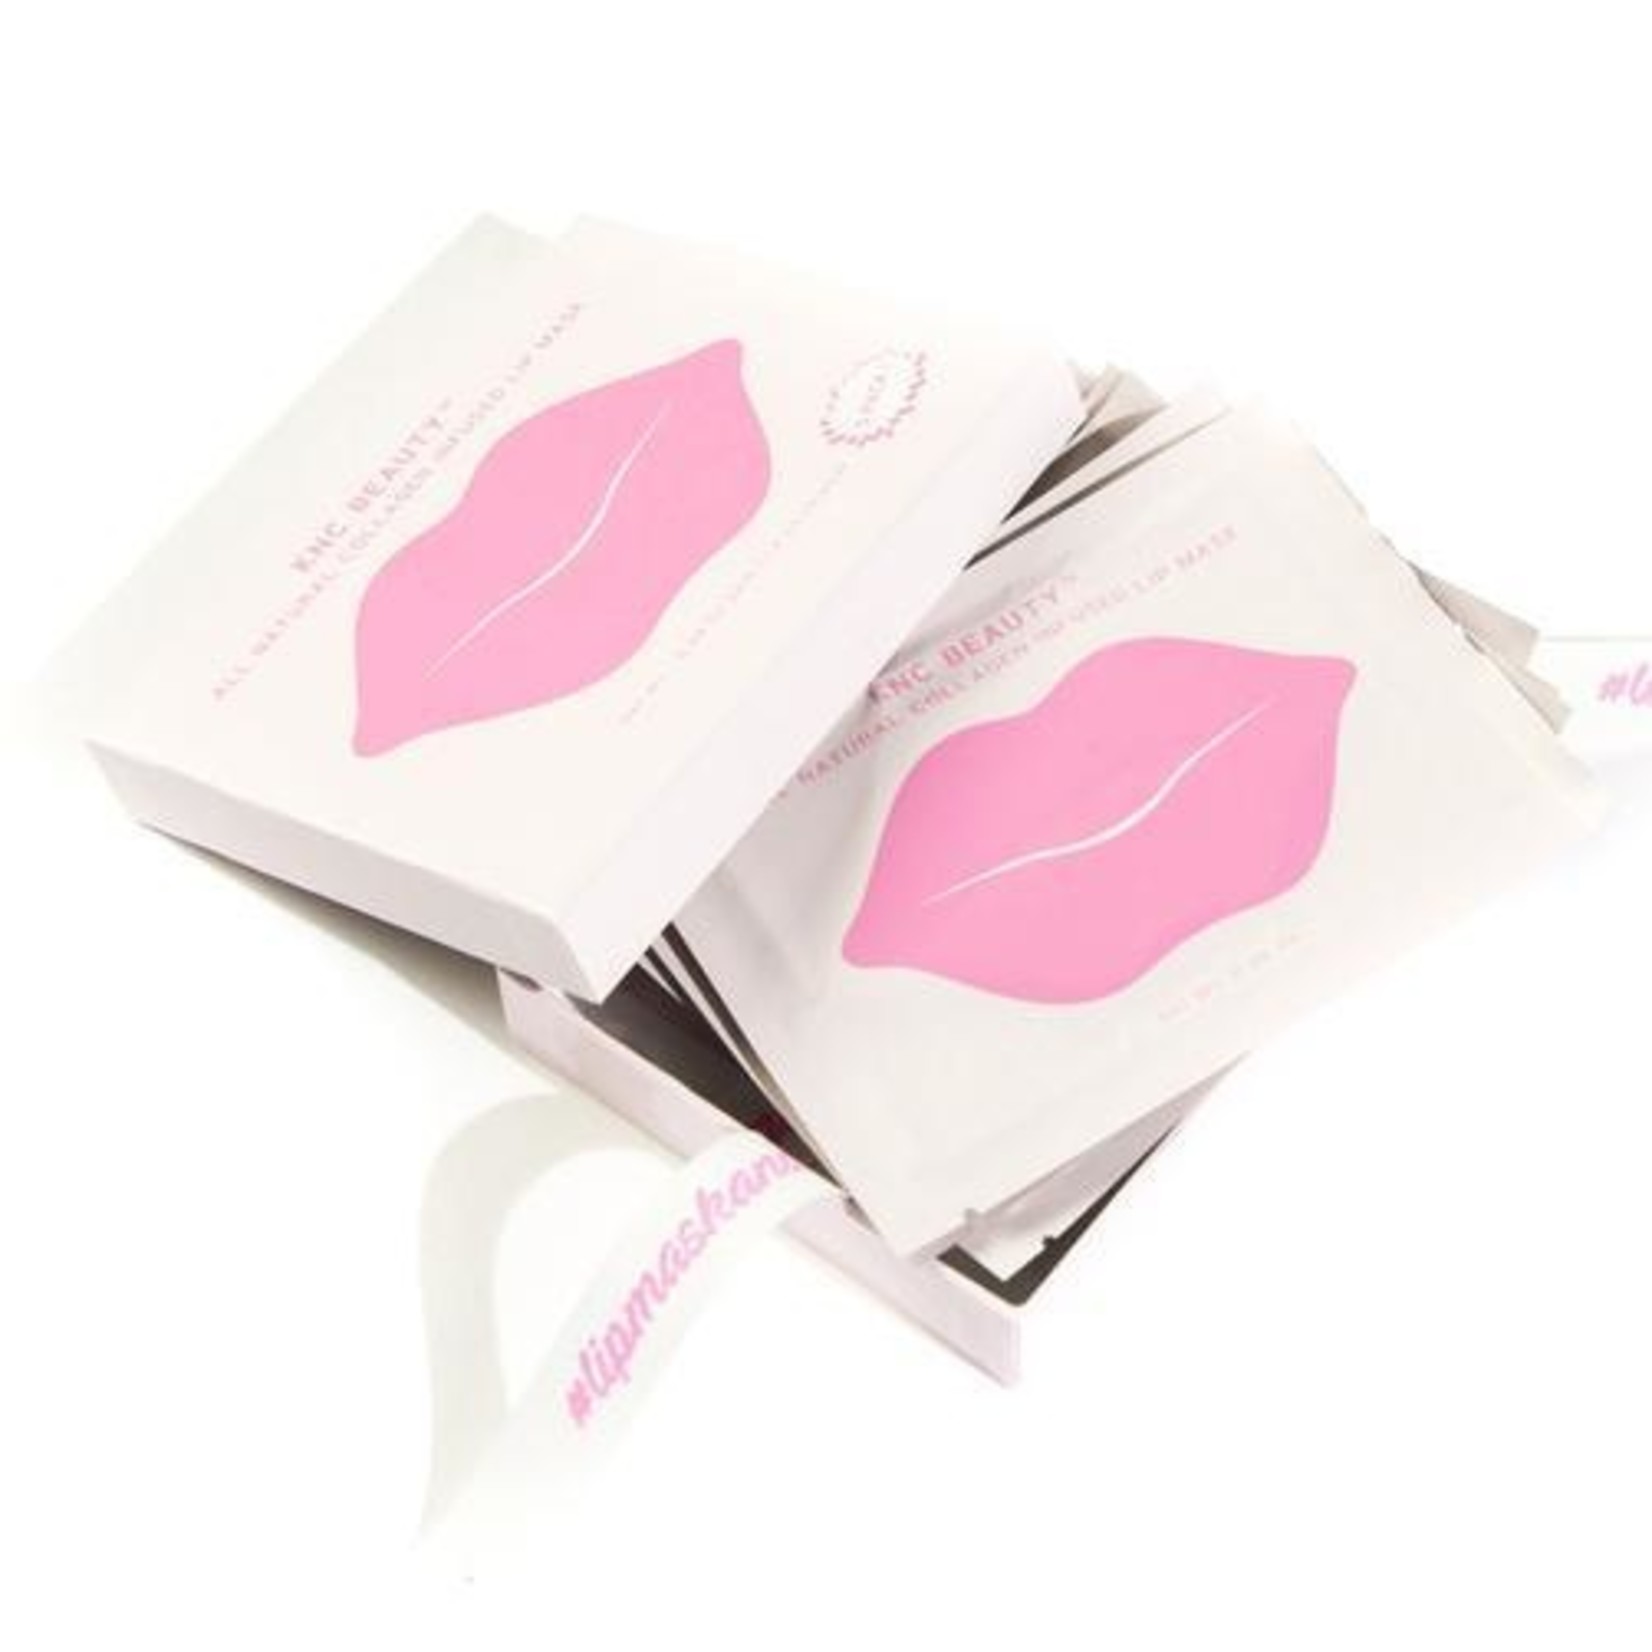 KNC Beauty Collagen Infused Lip Mask 5-Pack